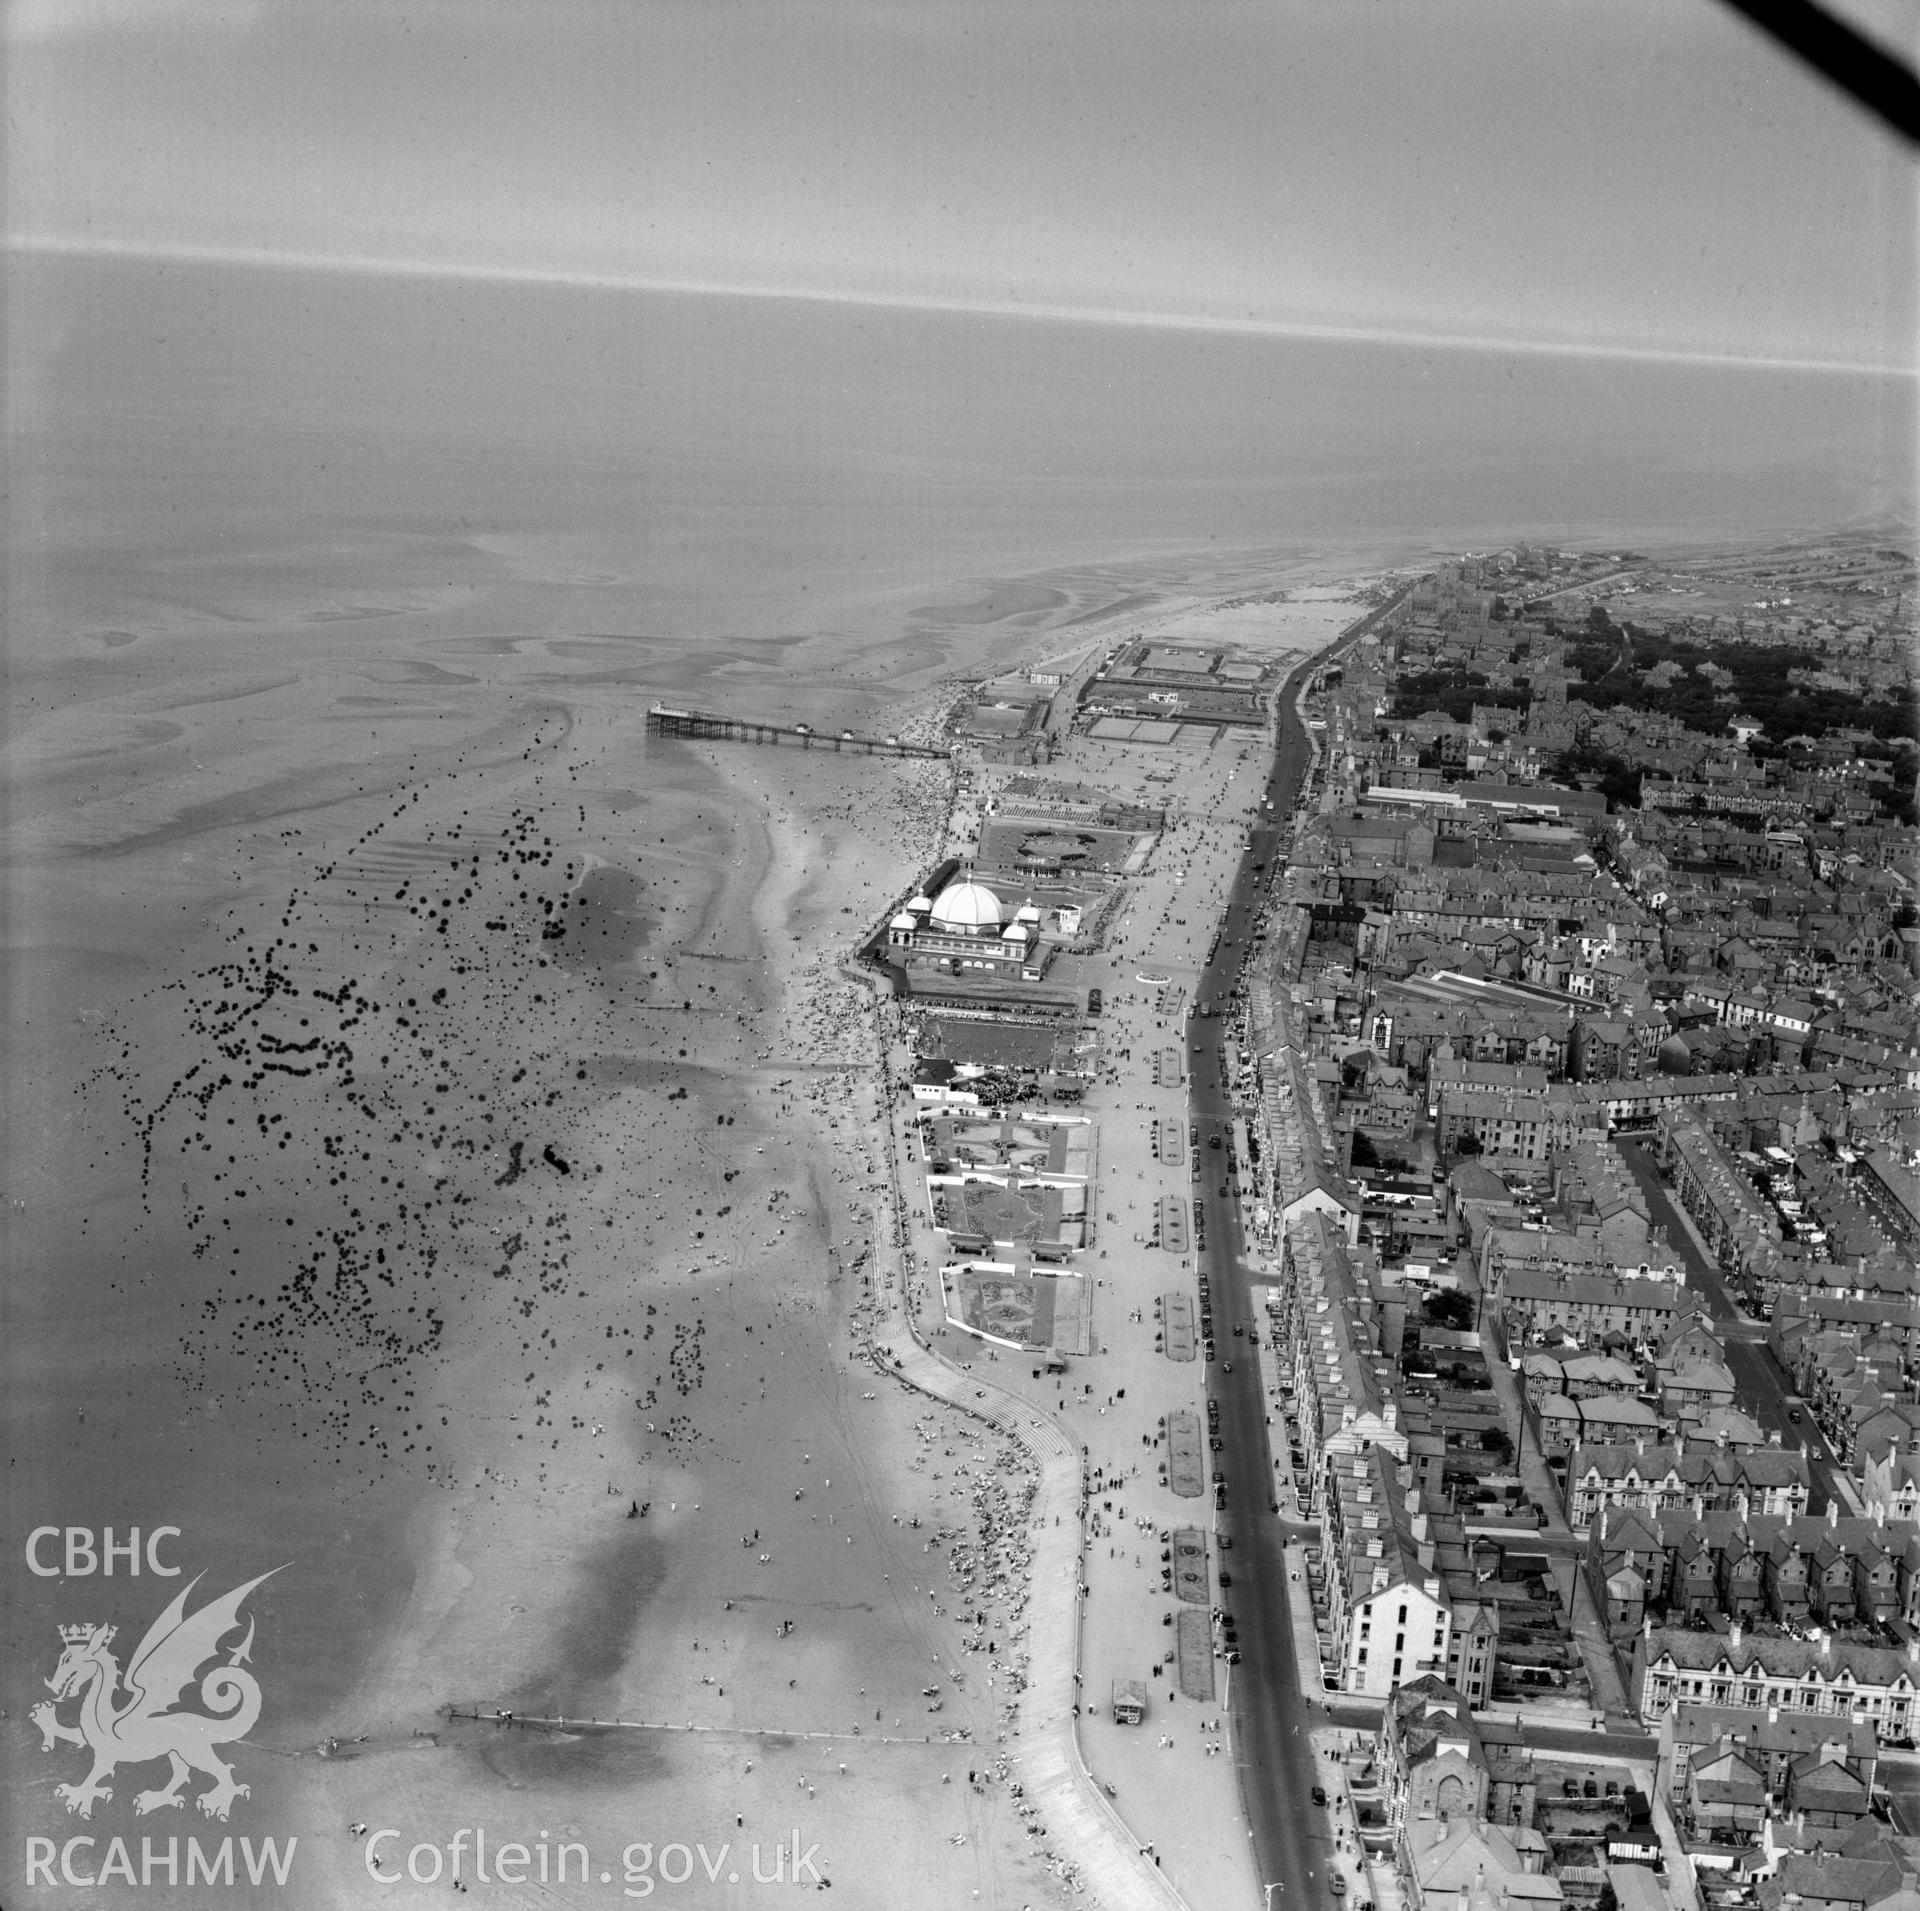 Distant view of Rhyl